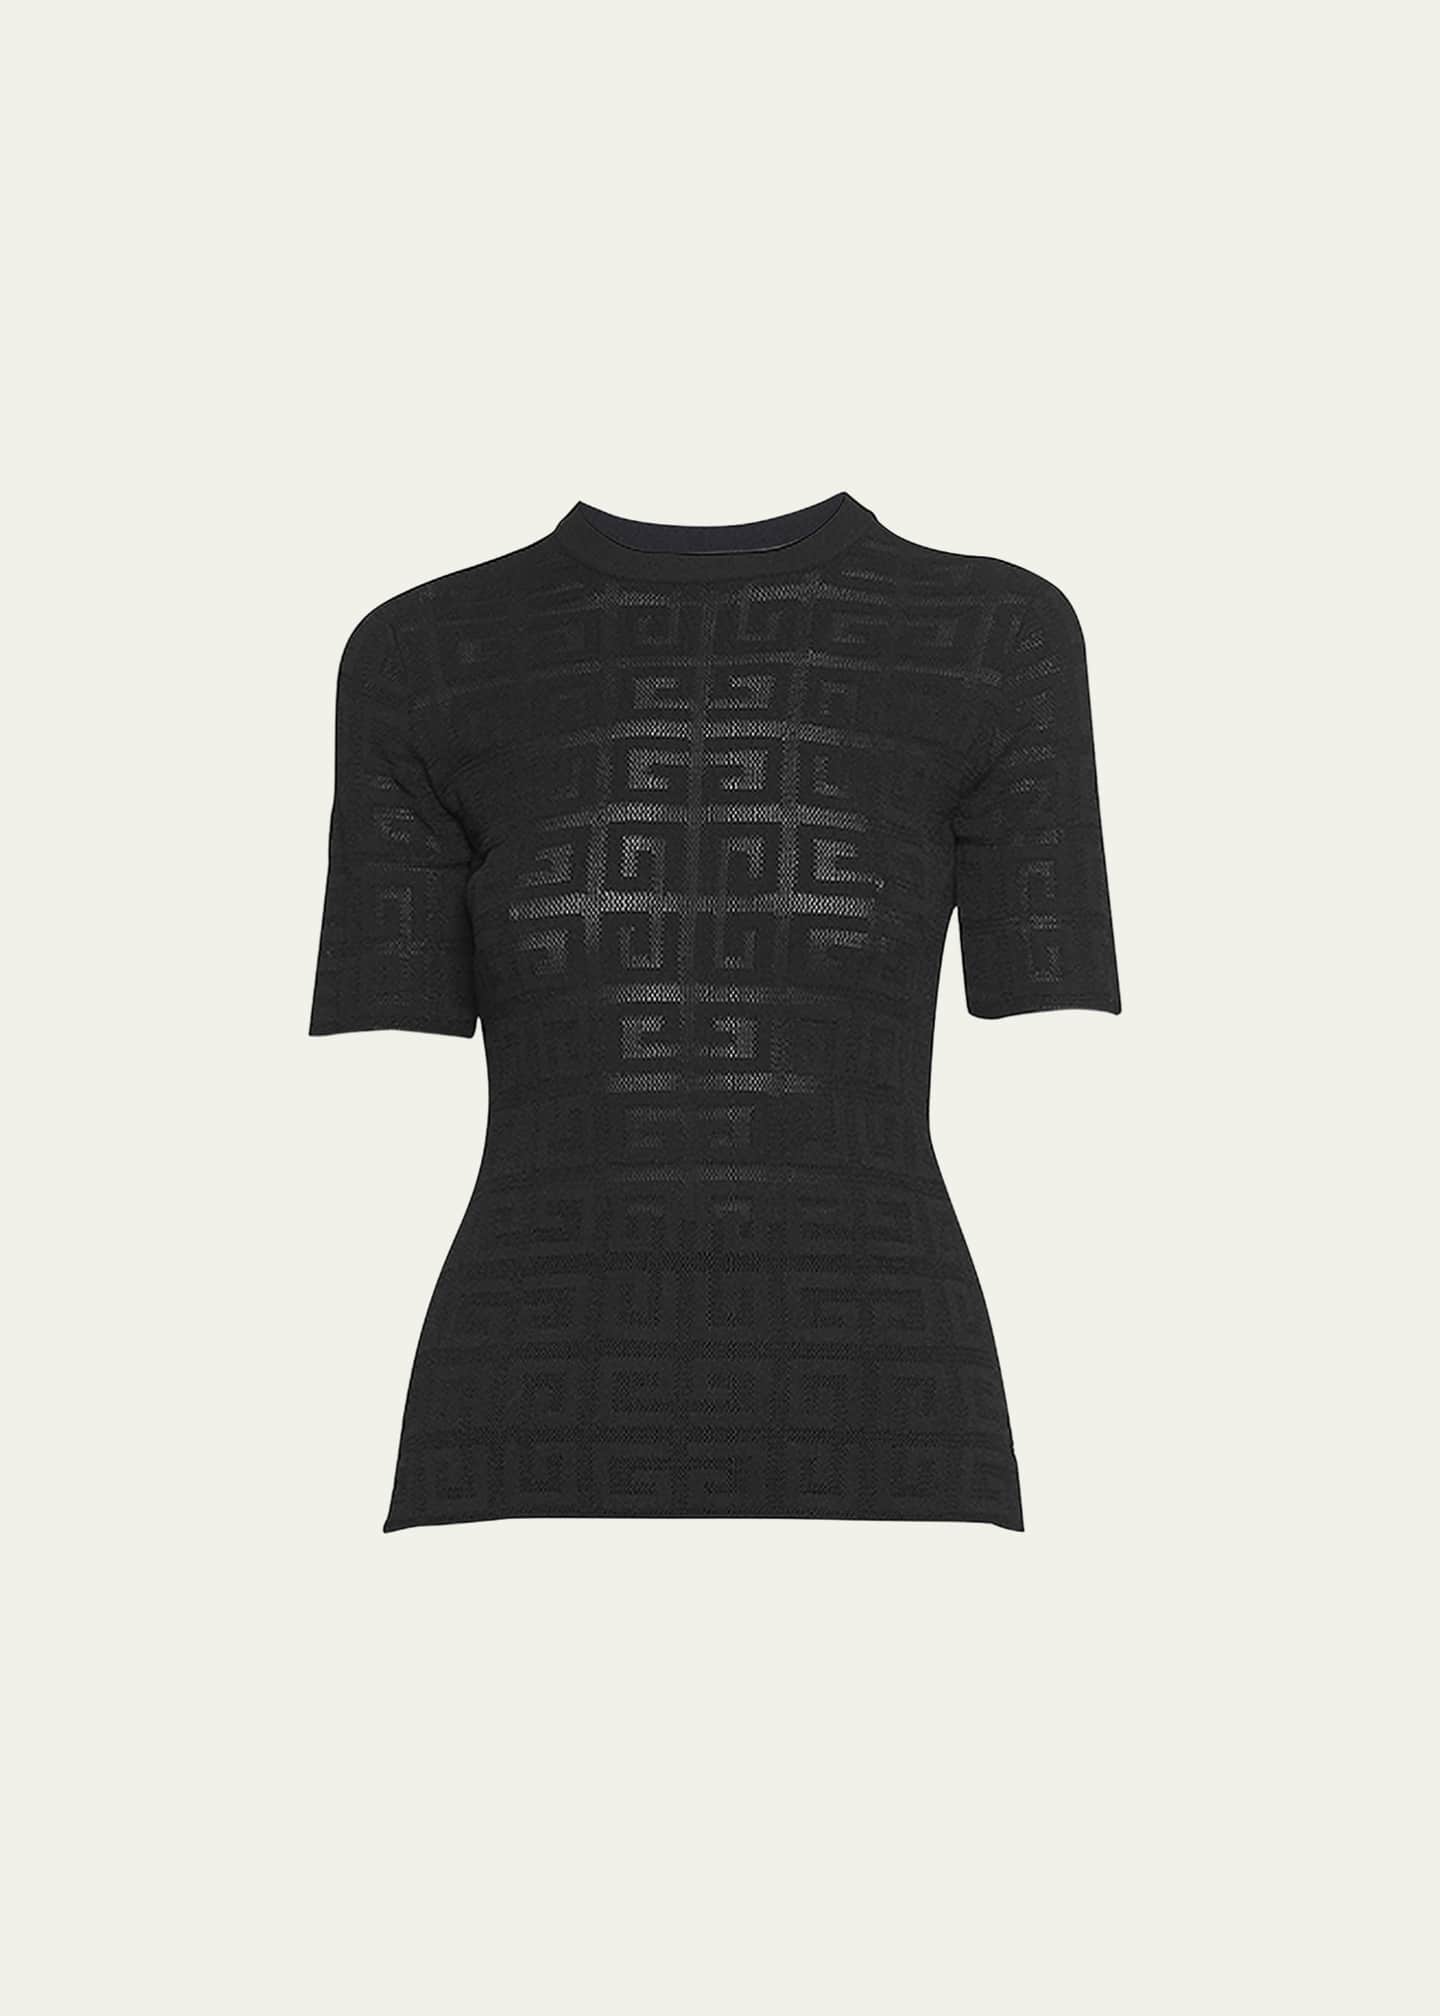 Givenchy 4G Lace Short-Sleeve Sweater - Bergdorf Goodman